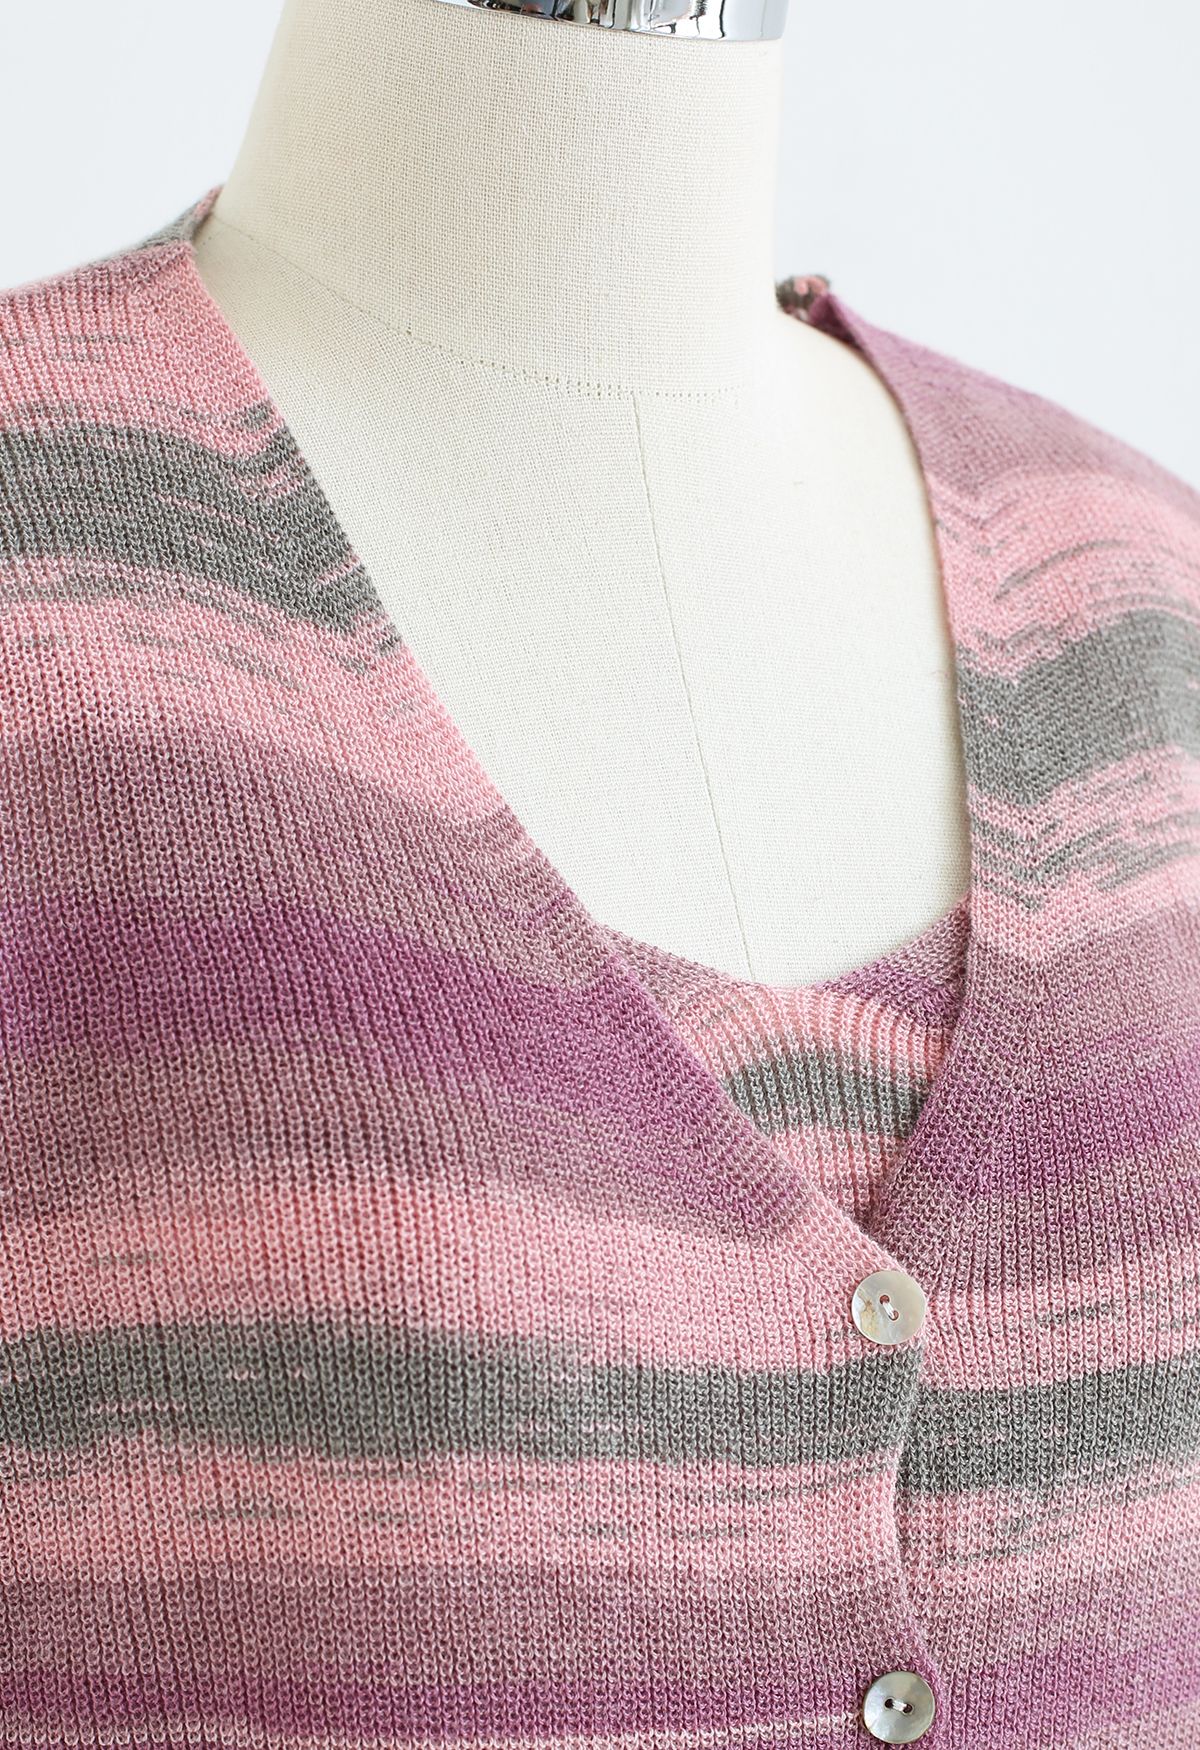 Mixcolor Striped Cami Crop Top and Cardigan Set in Pink